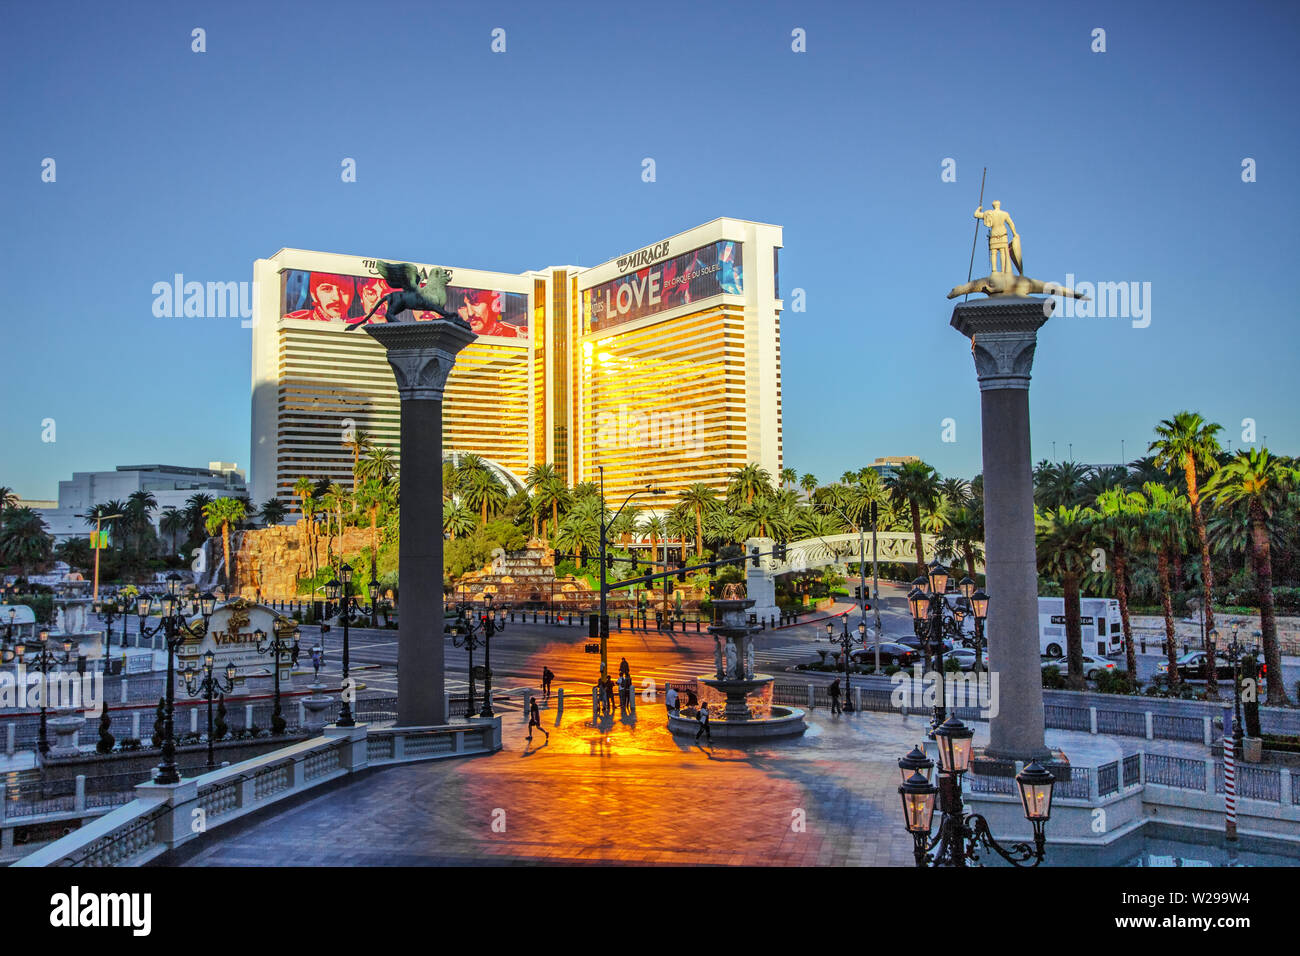 Las Vegas, Nevada, USA - May 6, 2019: Tourists cross a busy street on the Las Vegas Boulevard at sunrise with the Mirage Resort and Casino. Stock Photo